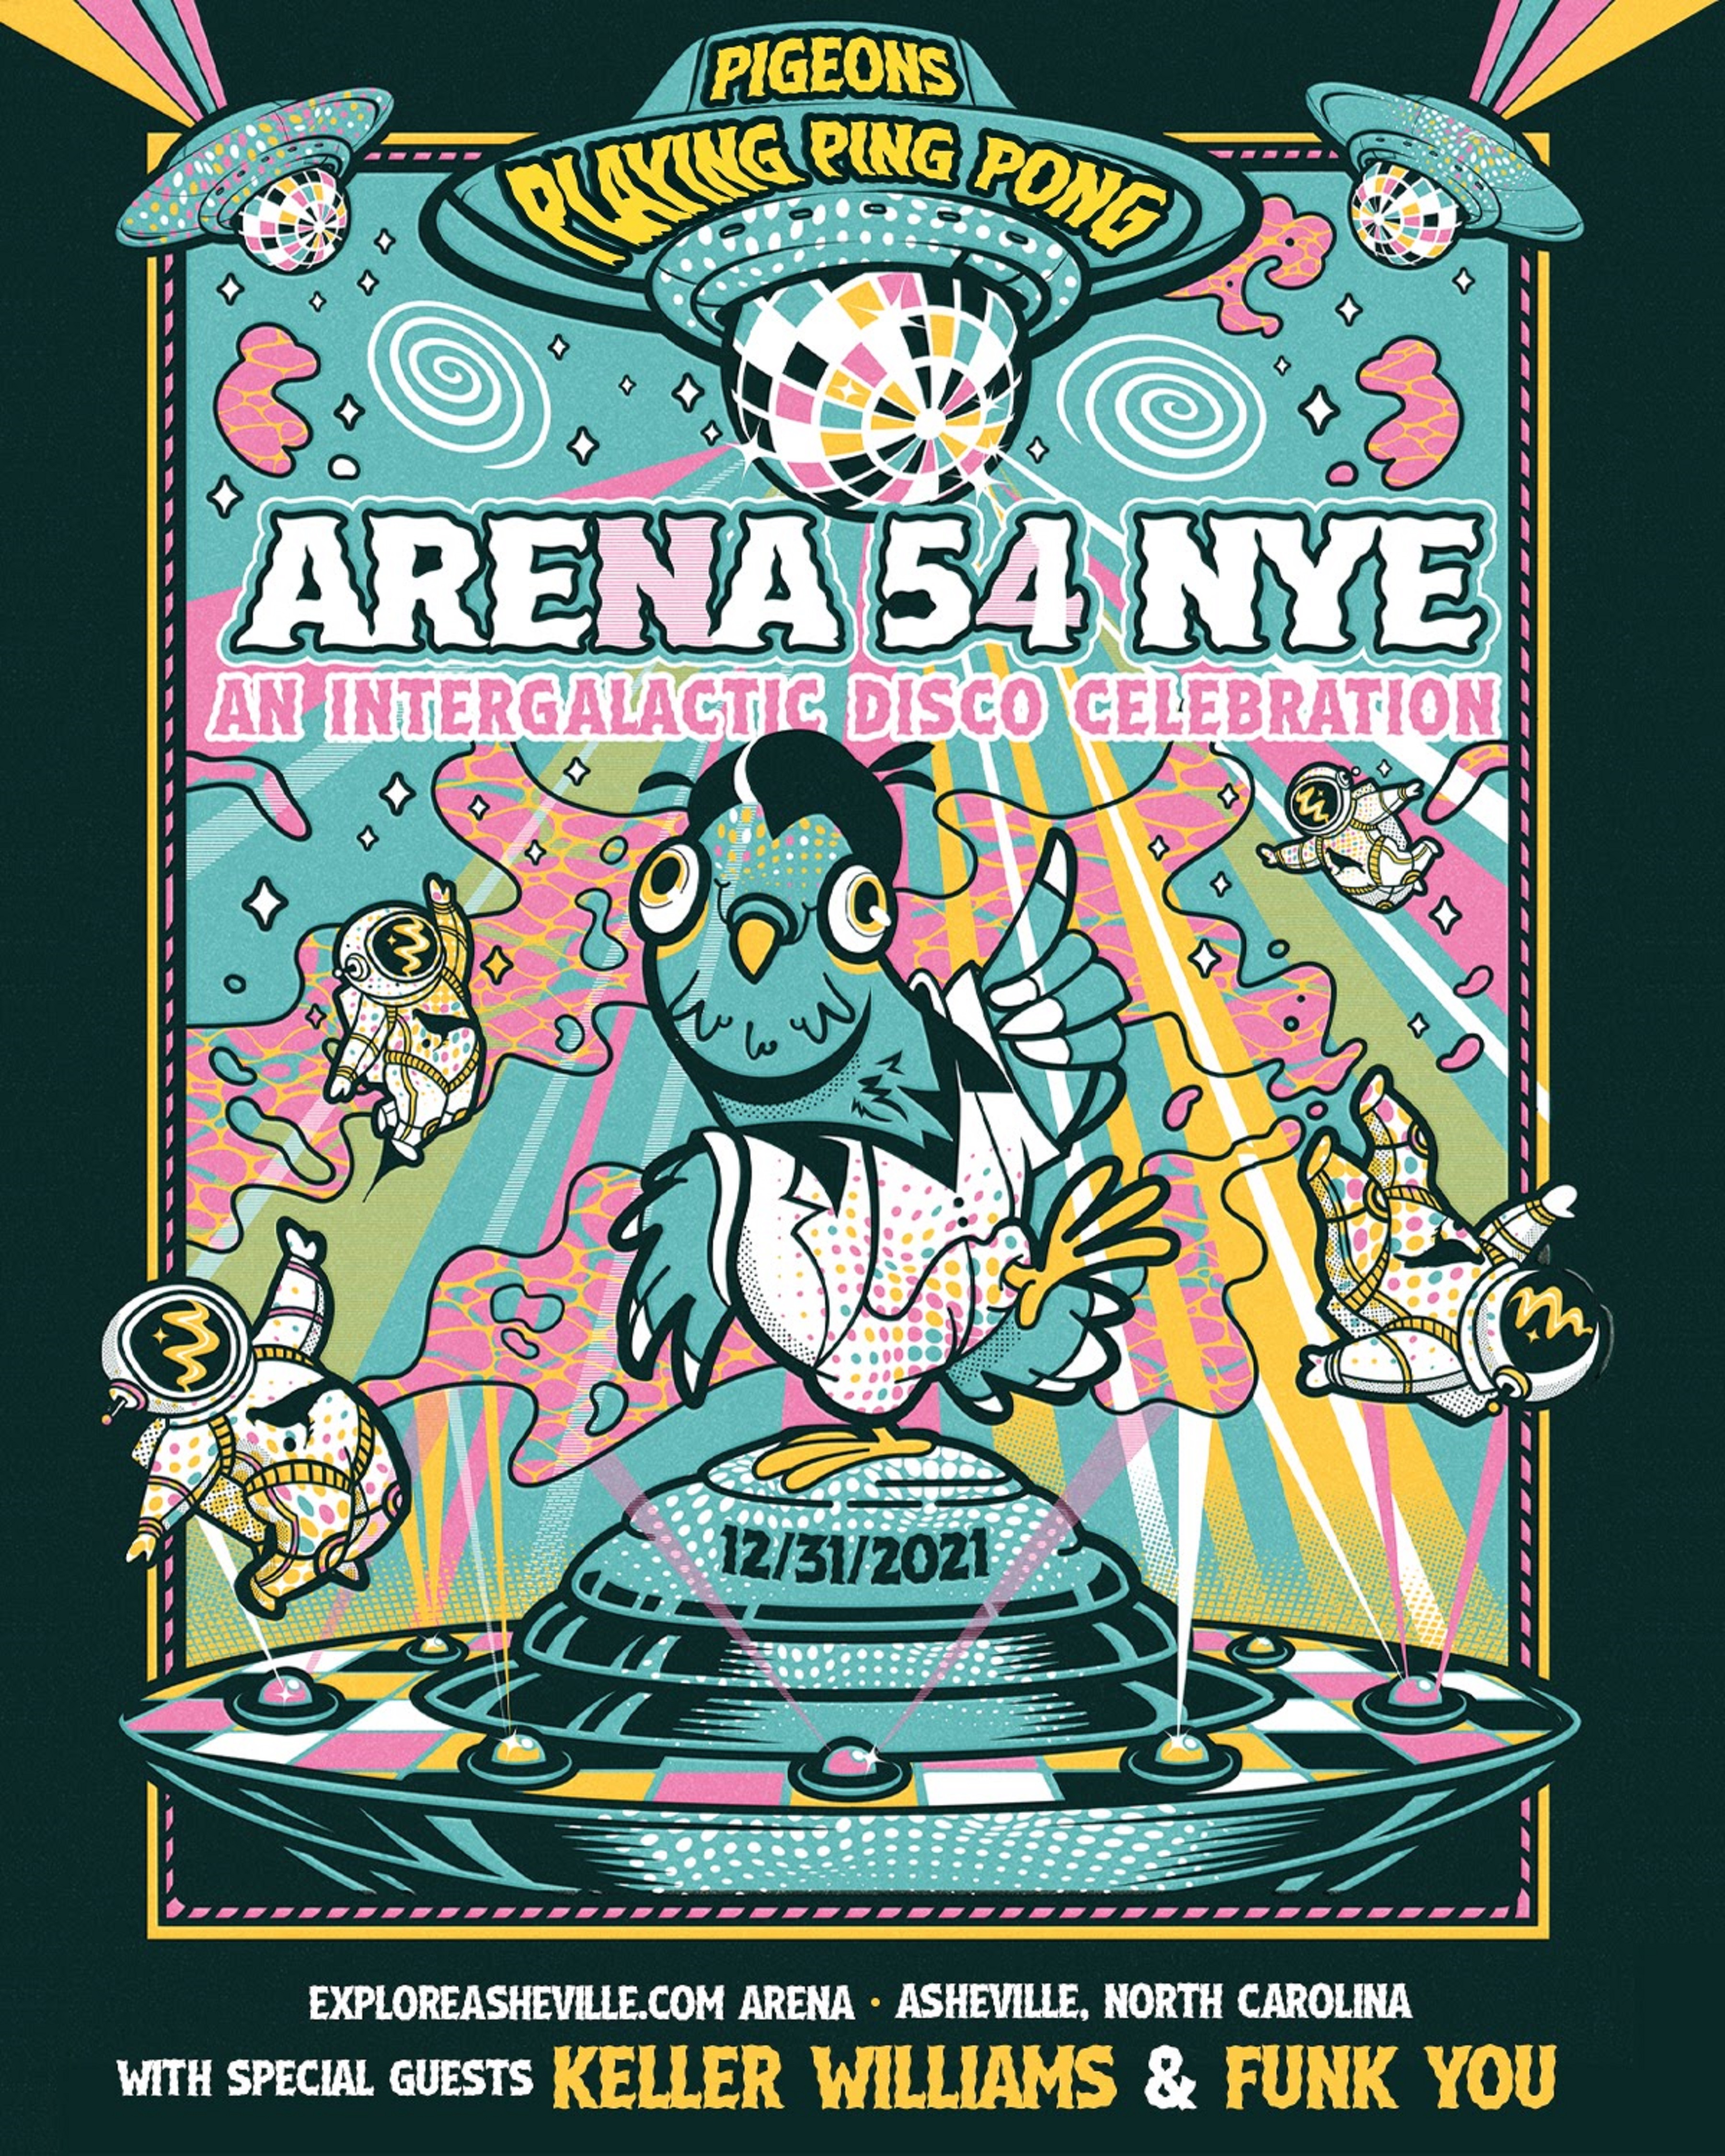 PIGEONS PLAYING PING PONG ANNOUNCES “ARENA 54 NYE” ASHEVILLE NEW YEAR’S EVE RUN